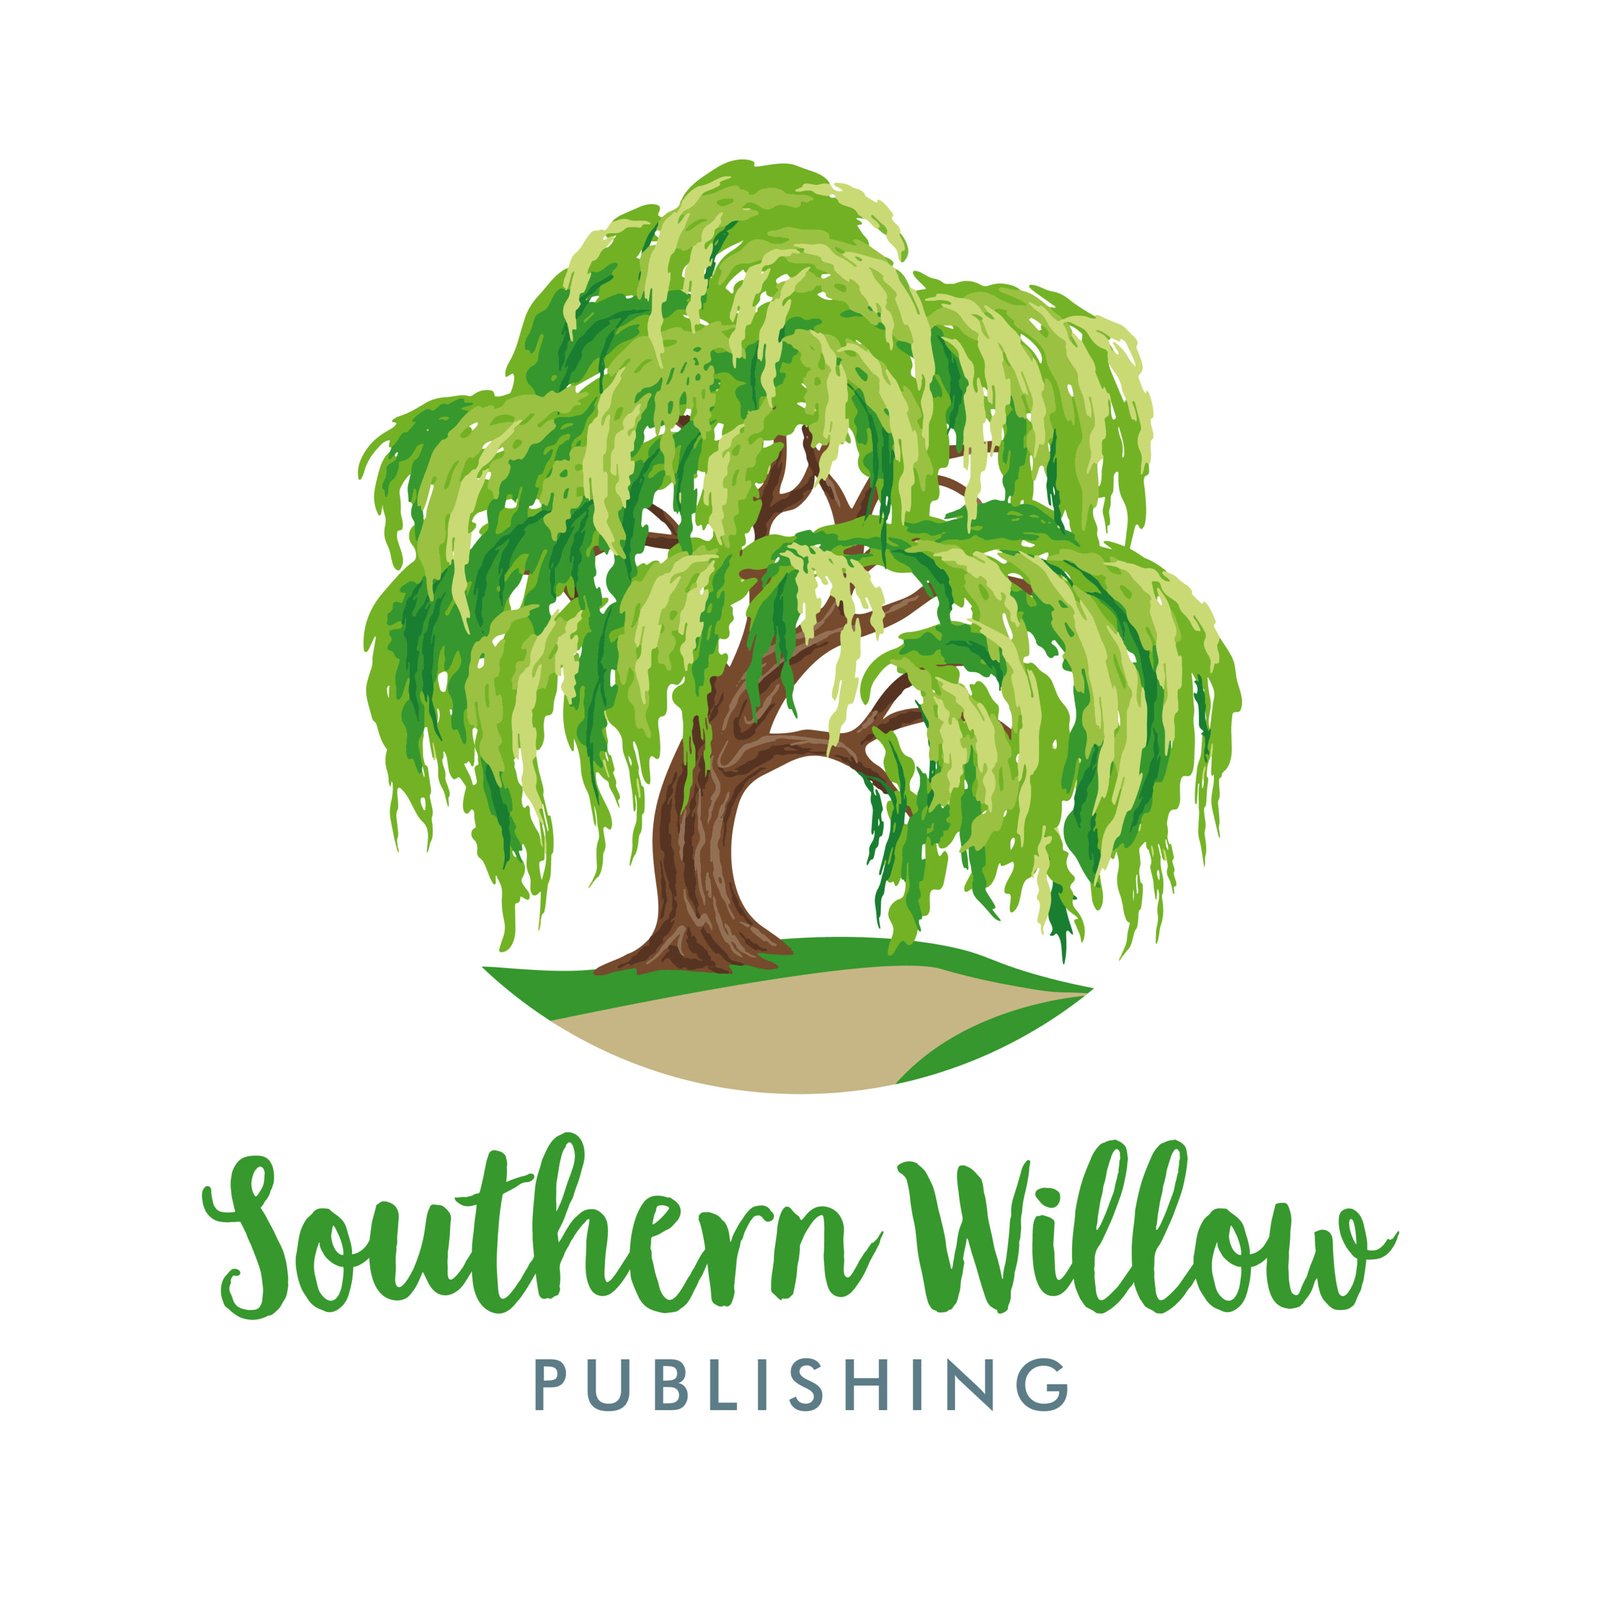 Southern Willow Publishing